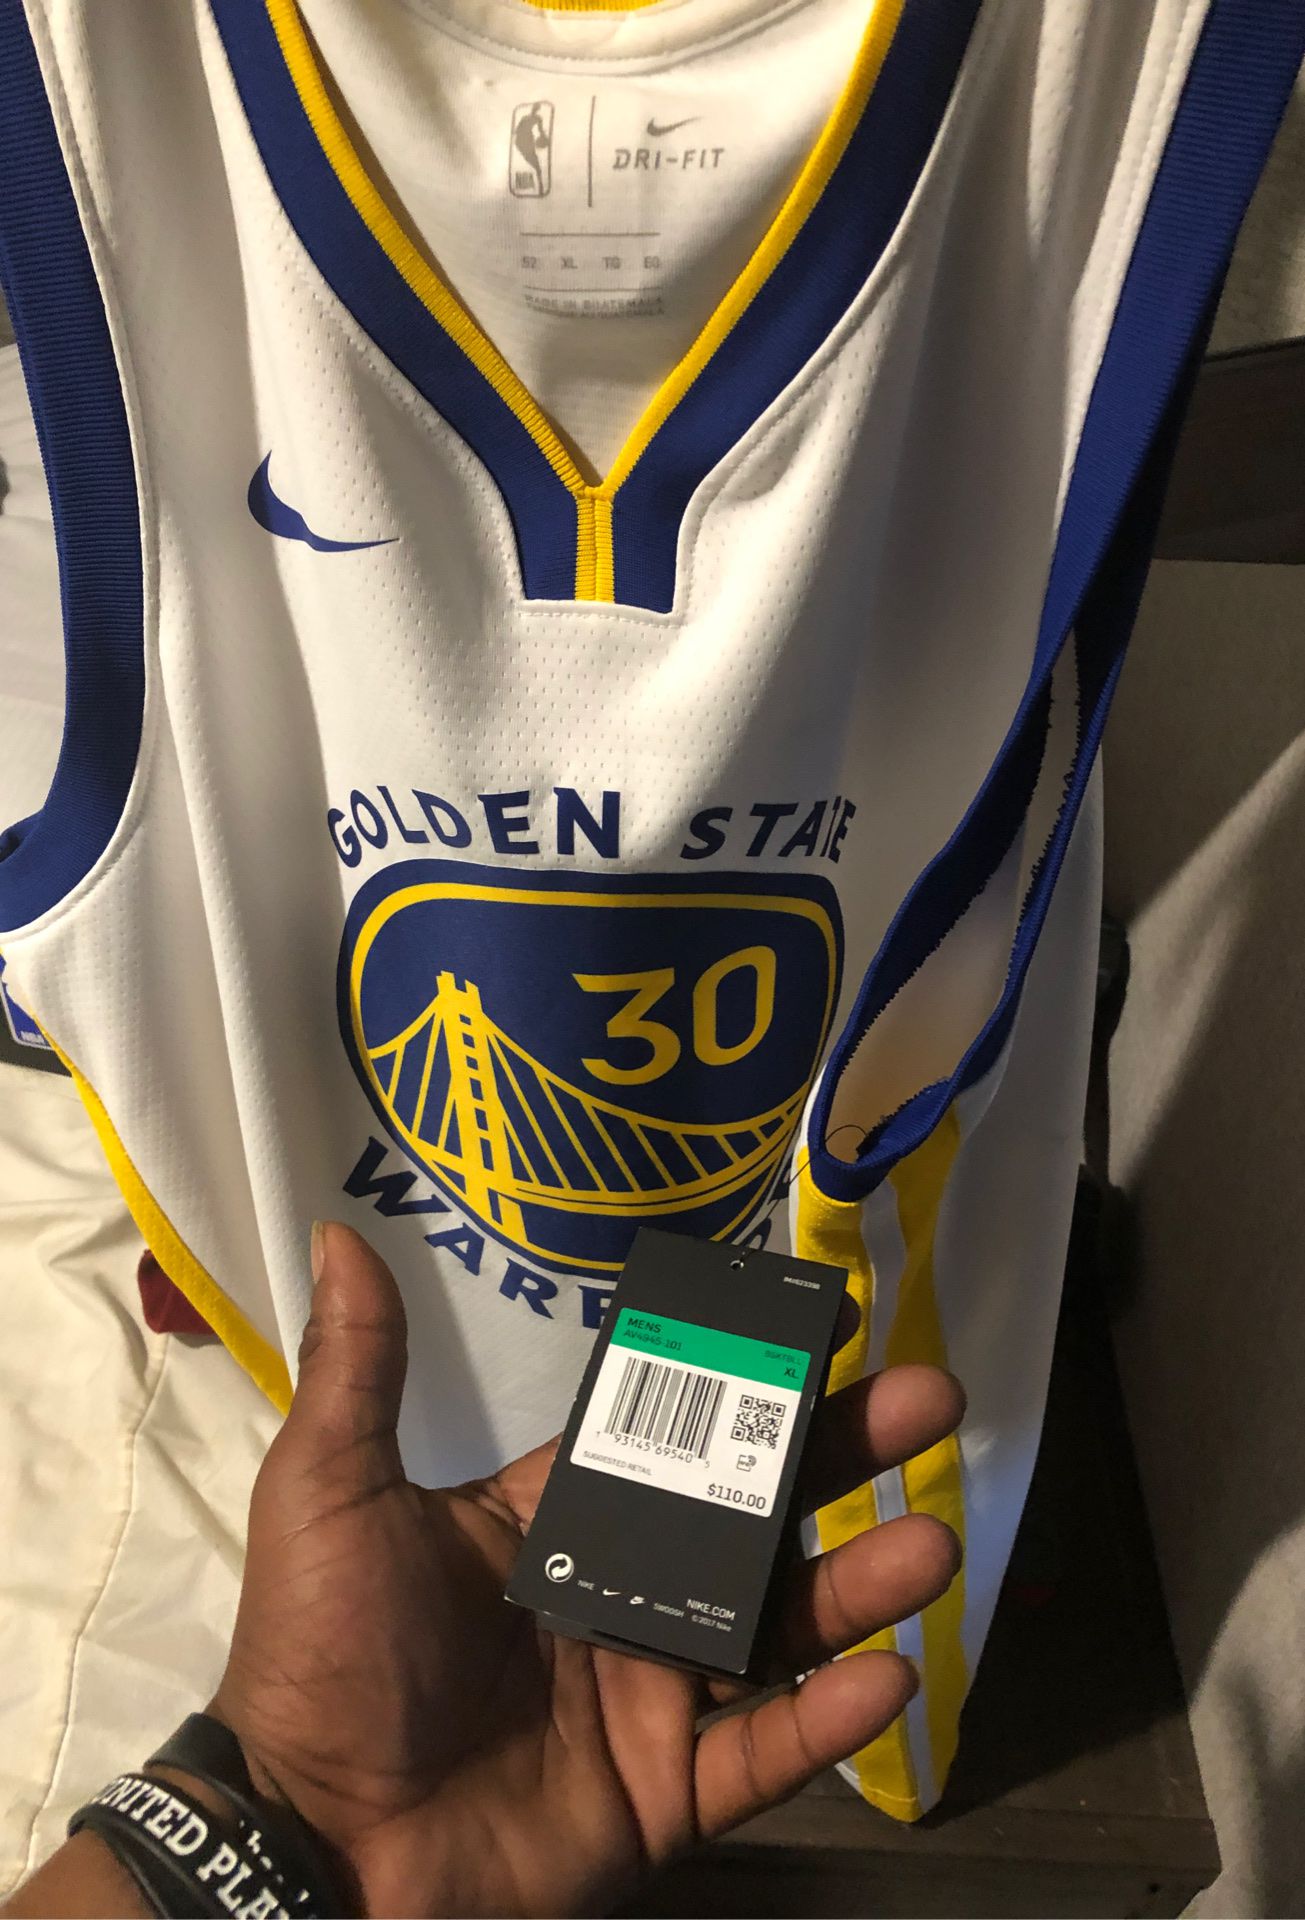 Brand new steph curry jersey never worn prices at 110